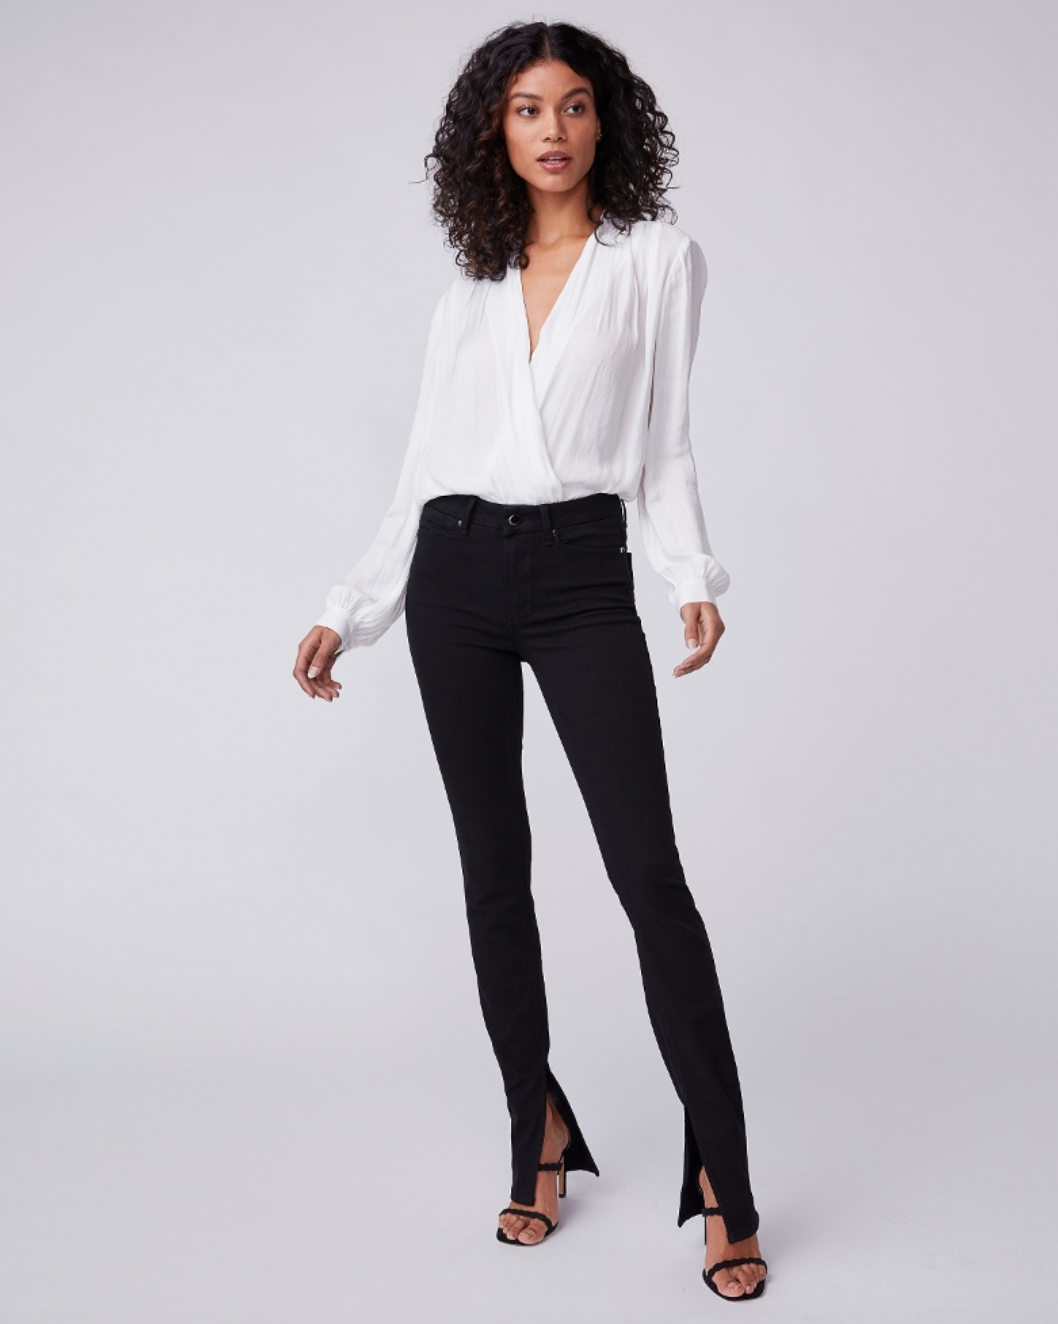 PAIGE + Constance Extra Long – Boss Black